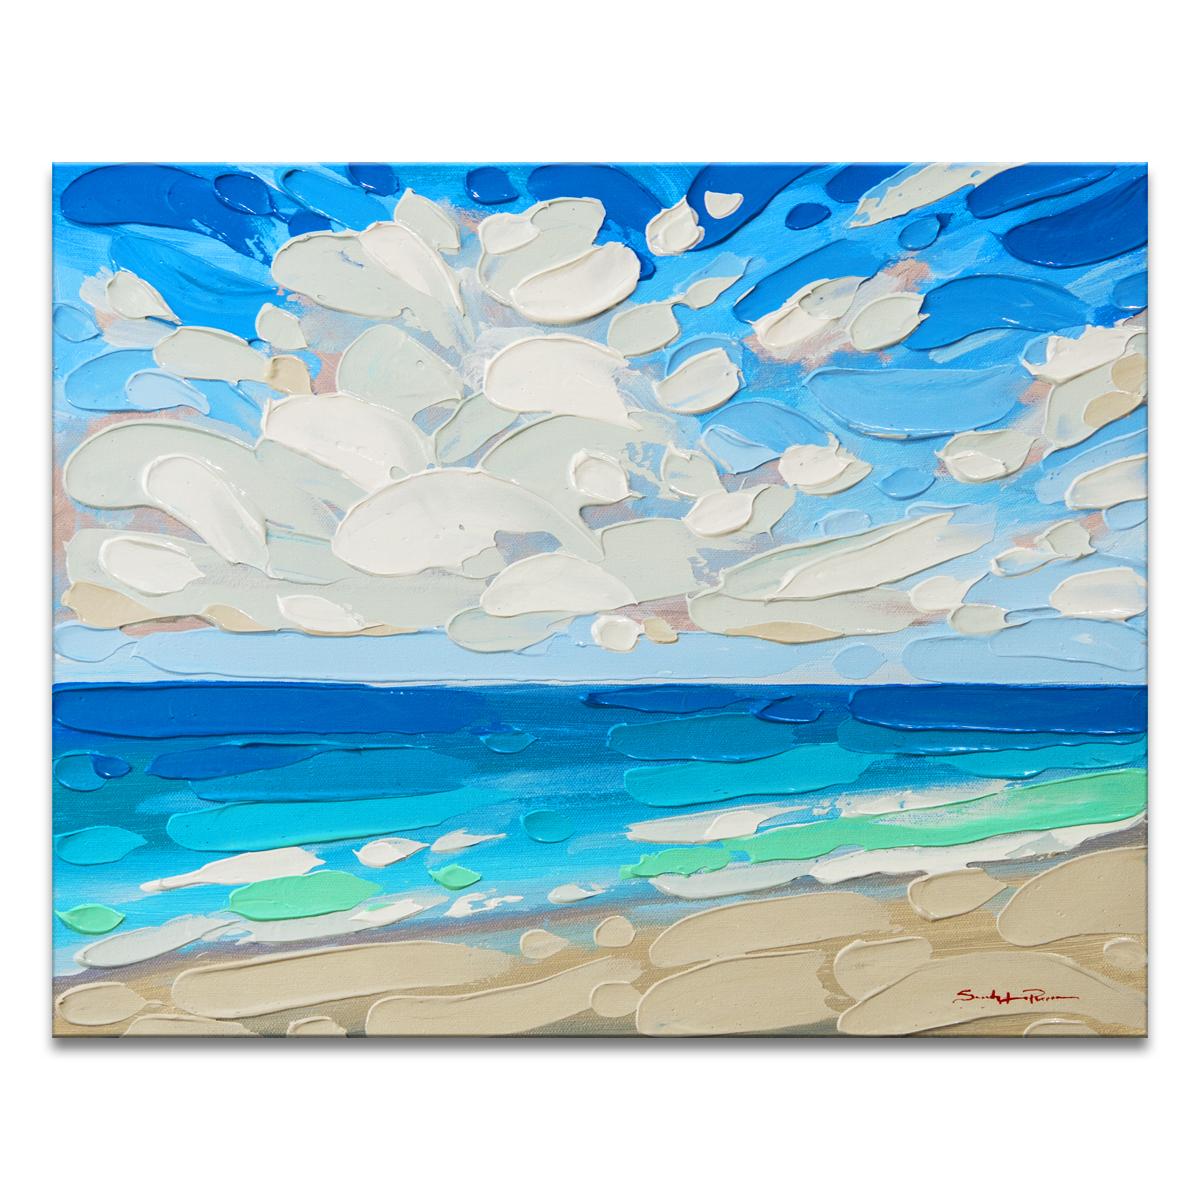 ‘Reflections IV' Wrapped Canvas Original Painting features a scenic seascape in vibrant tones of blue, green, gray, white, sand, blush, and beige. Inspired by the beauty surrounding her in tropical Florida, Sarah LaPierre utilizes her profoundly